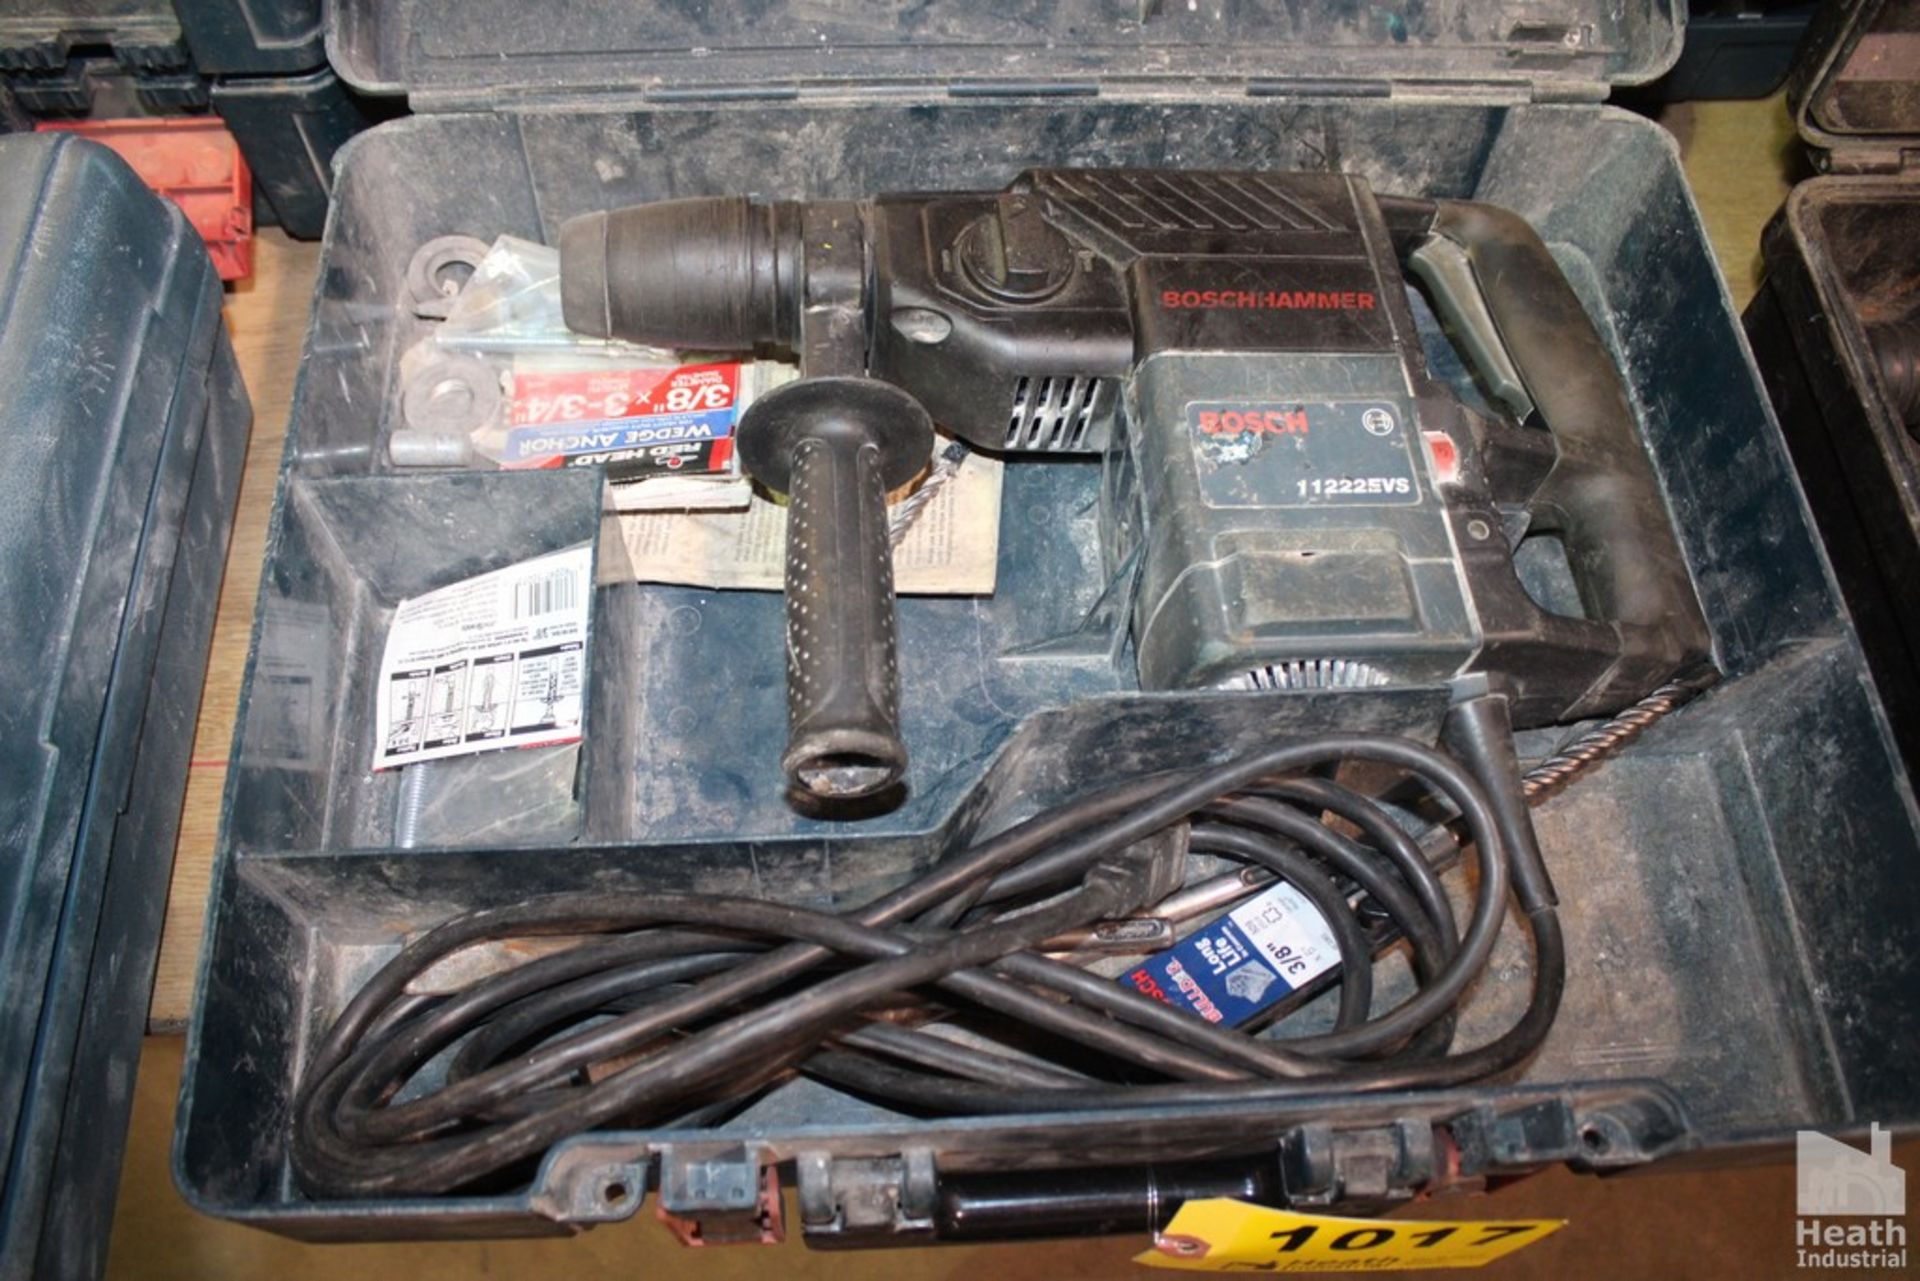 BOSCH MODEL 11222EVS 1-1/8" SDS ROTARY HAMMER DRILL WITH CASE